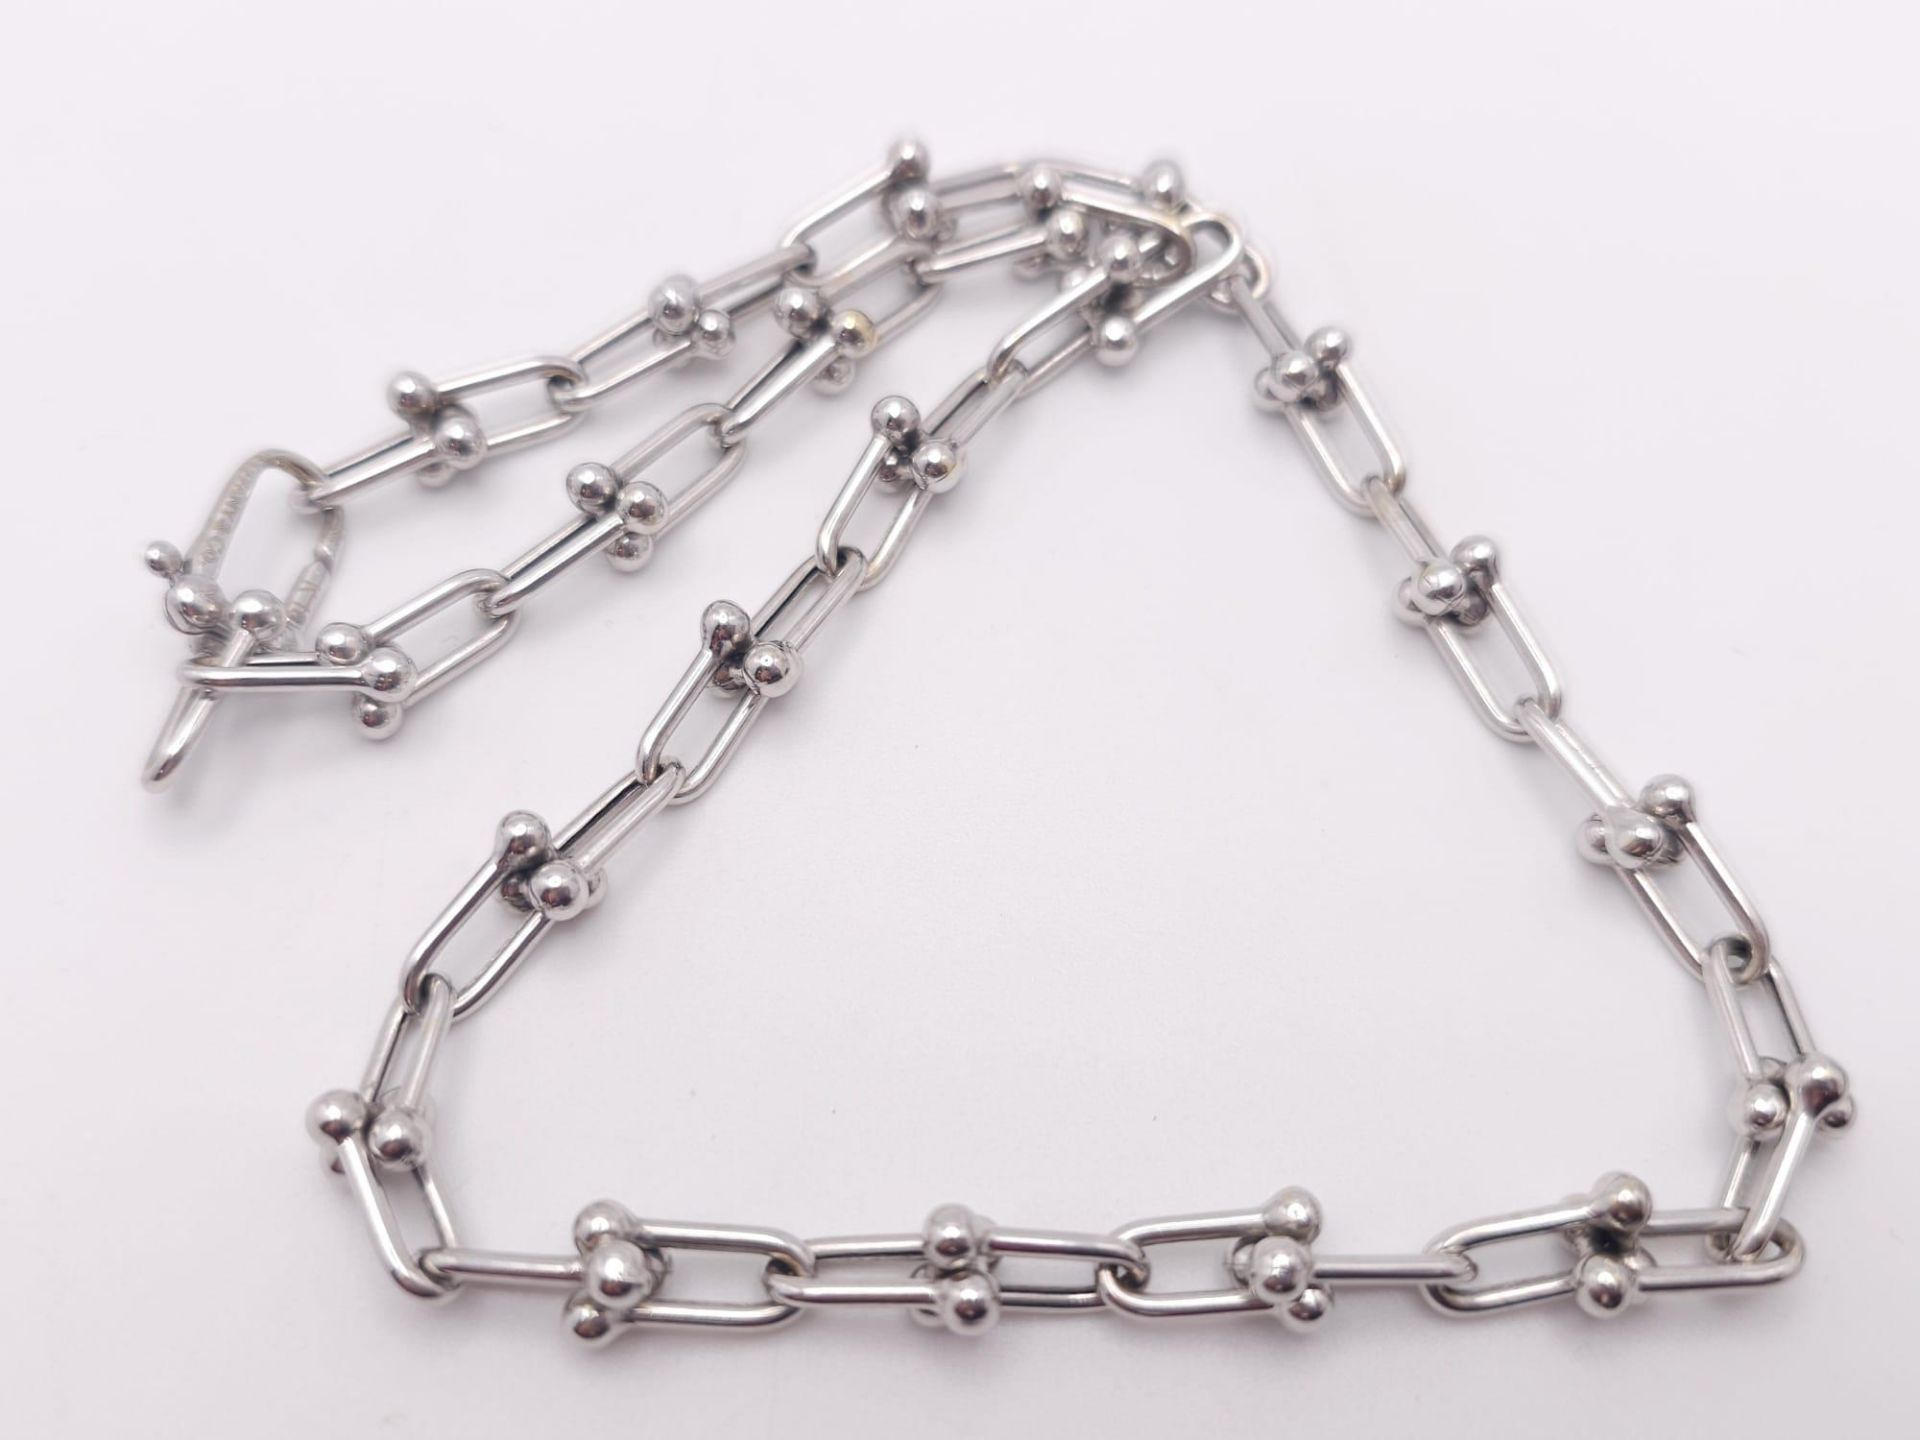 A Tiffany and Co. 18K White Elongated Link Necklace. Tiffany markings on clasp. 42cm length. 17. - Image 2 of 6